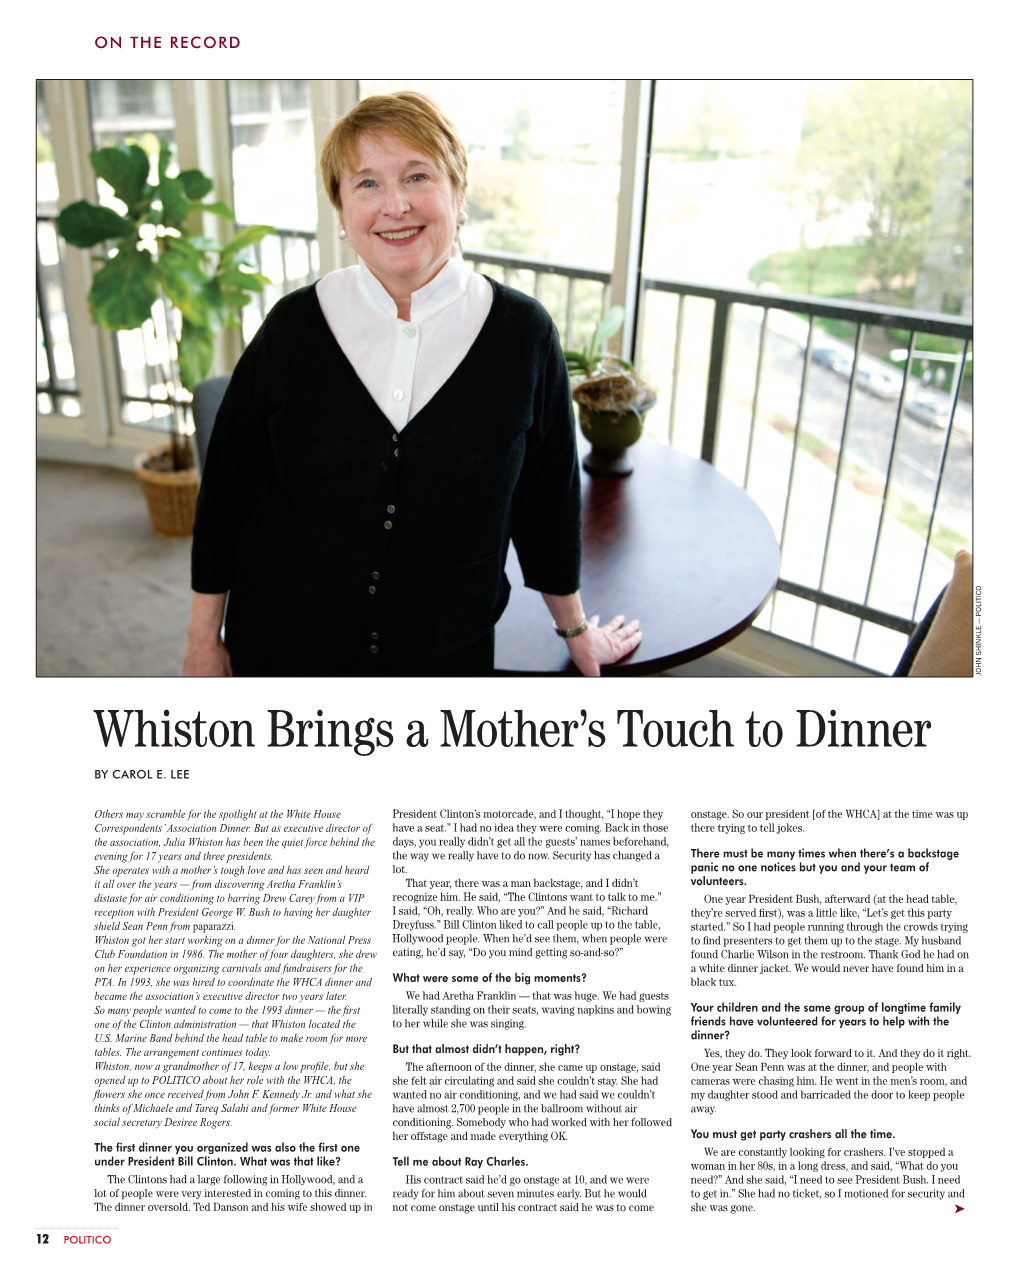 Whiston Brings a Mother's Touch to Dinner